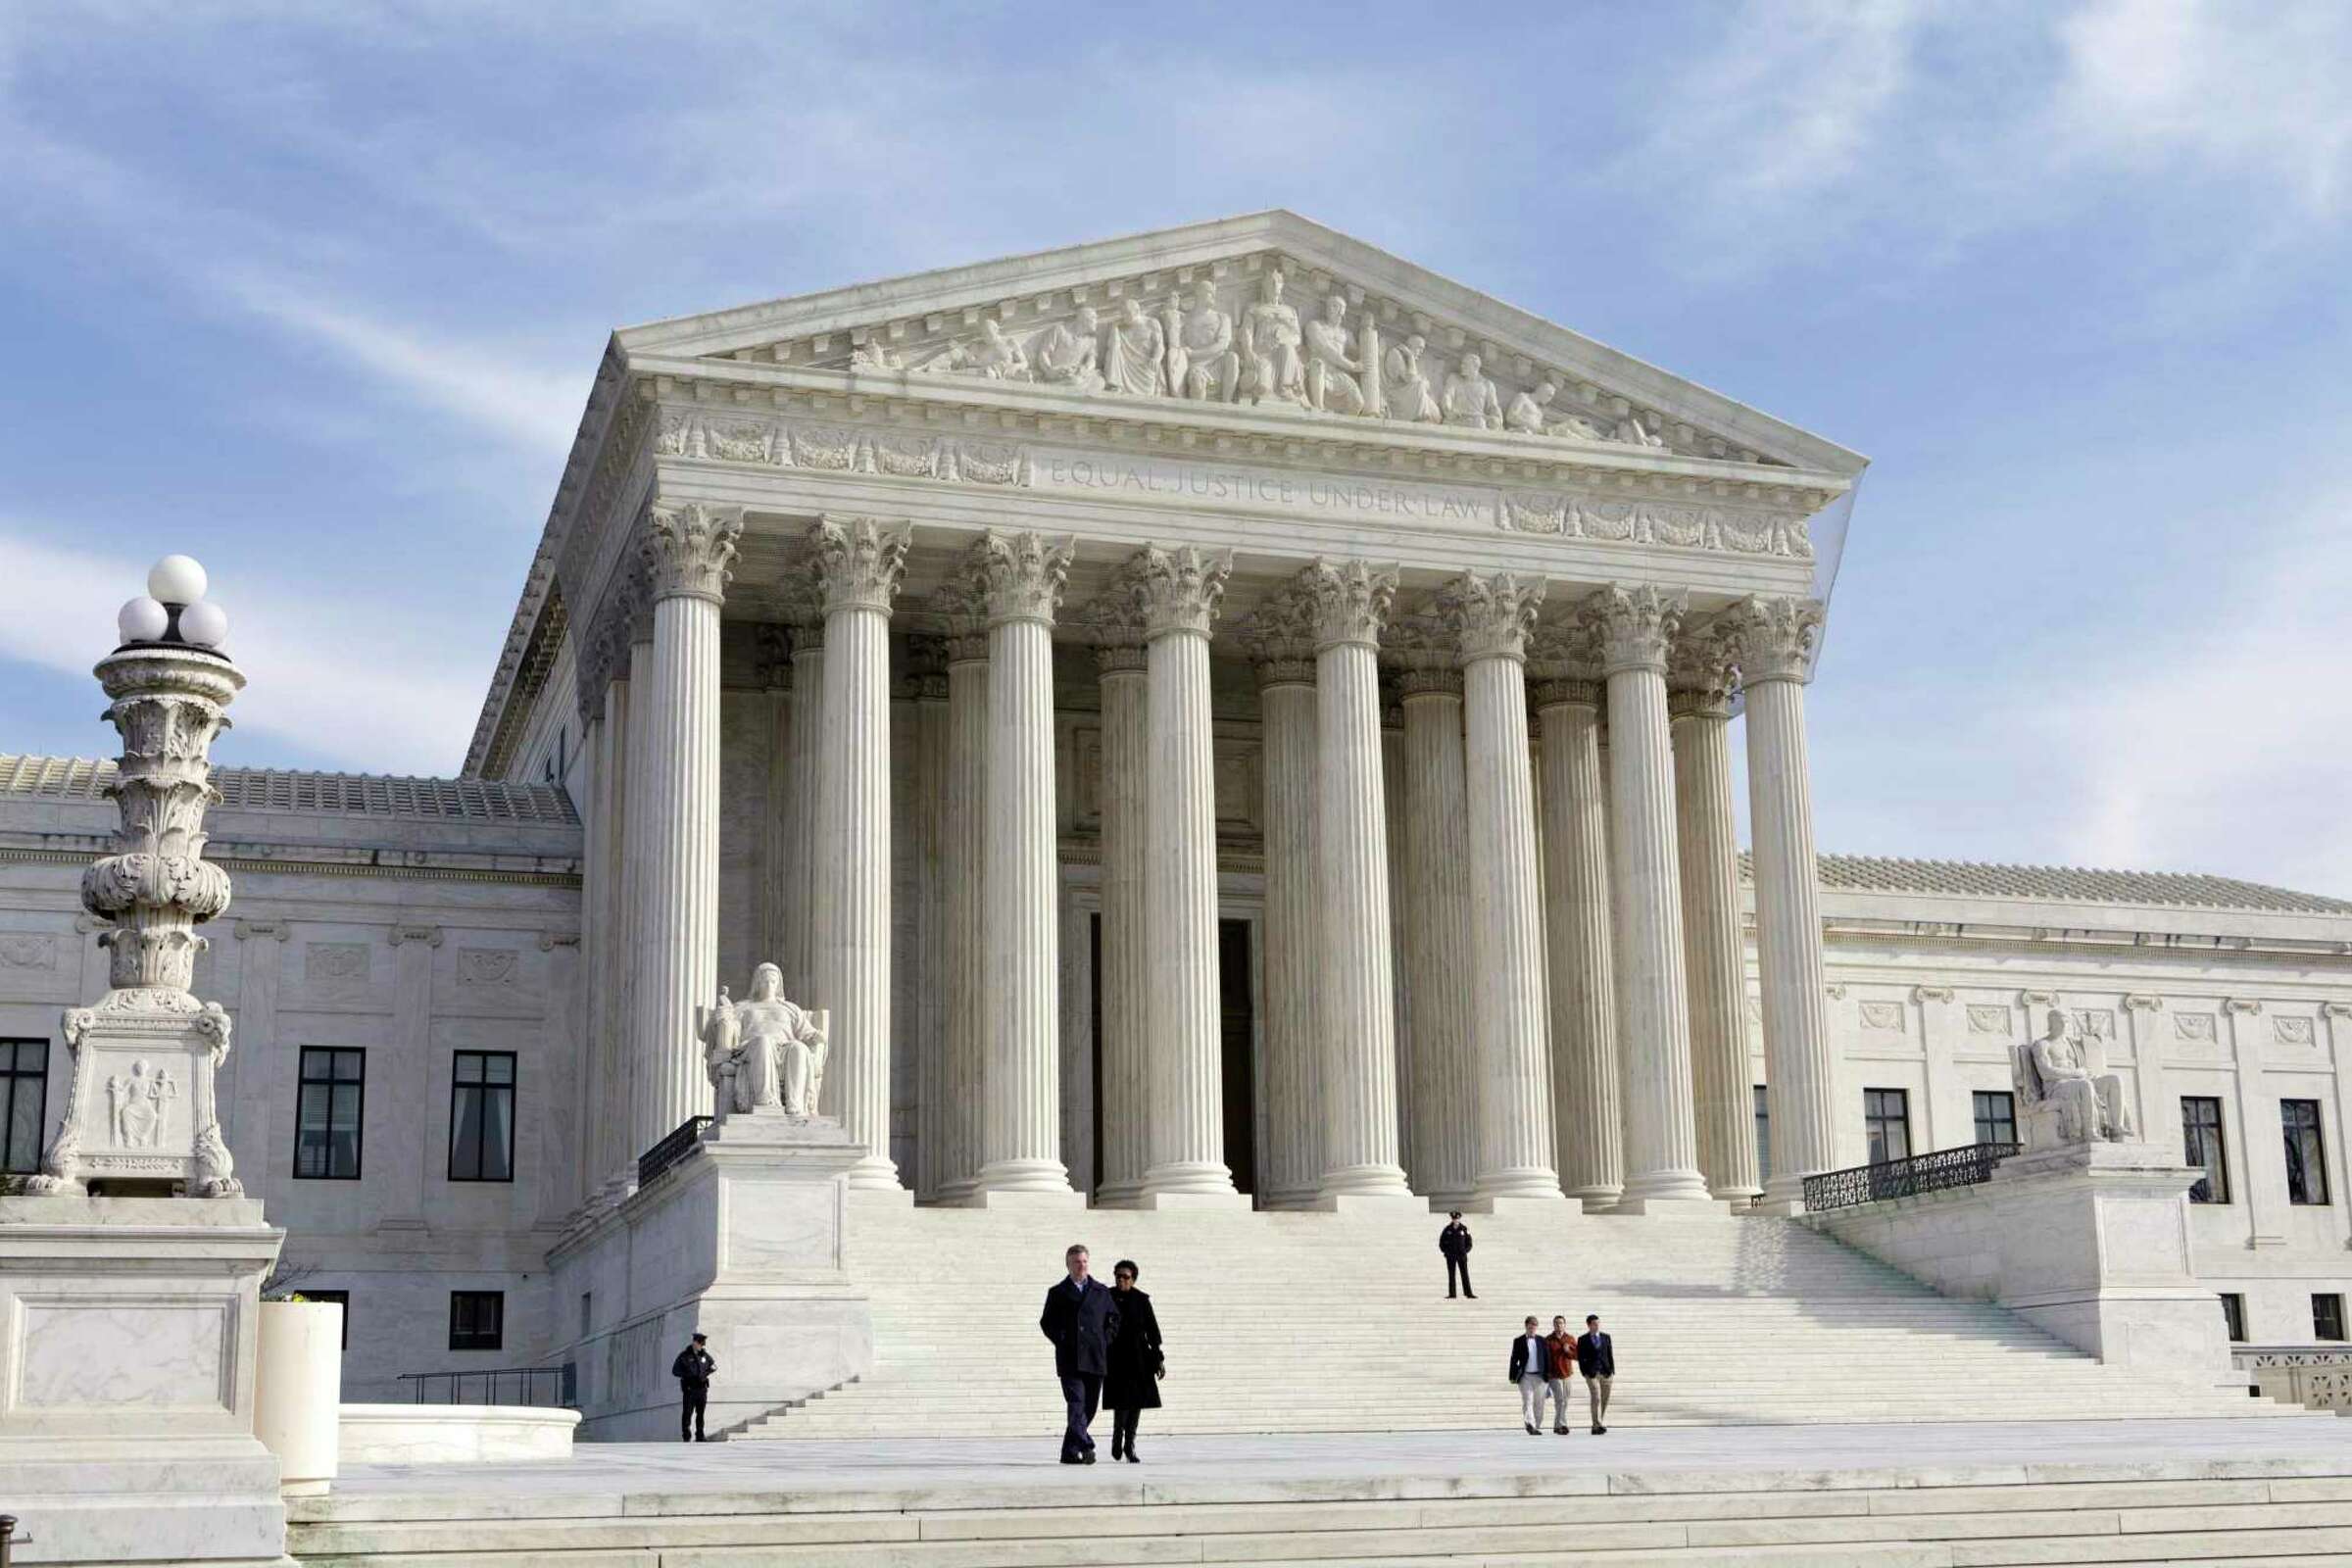 Supreme Court has voted to strike down Roe vs. Wade, leaked draft shows